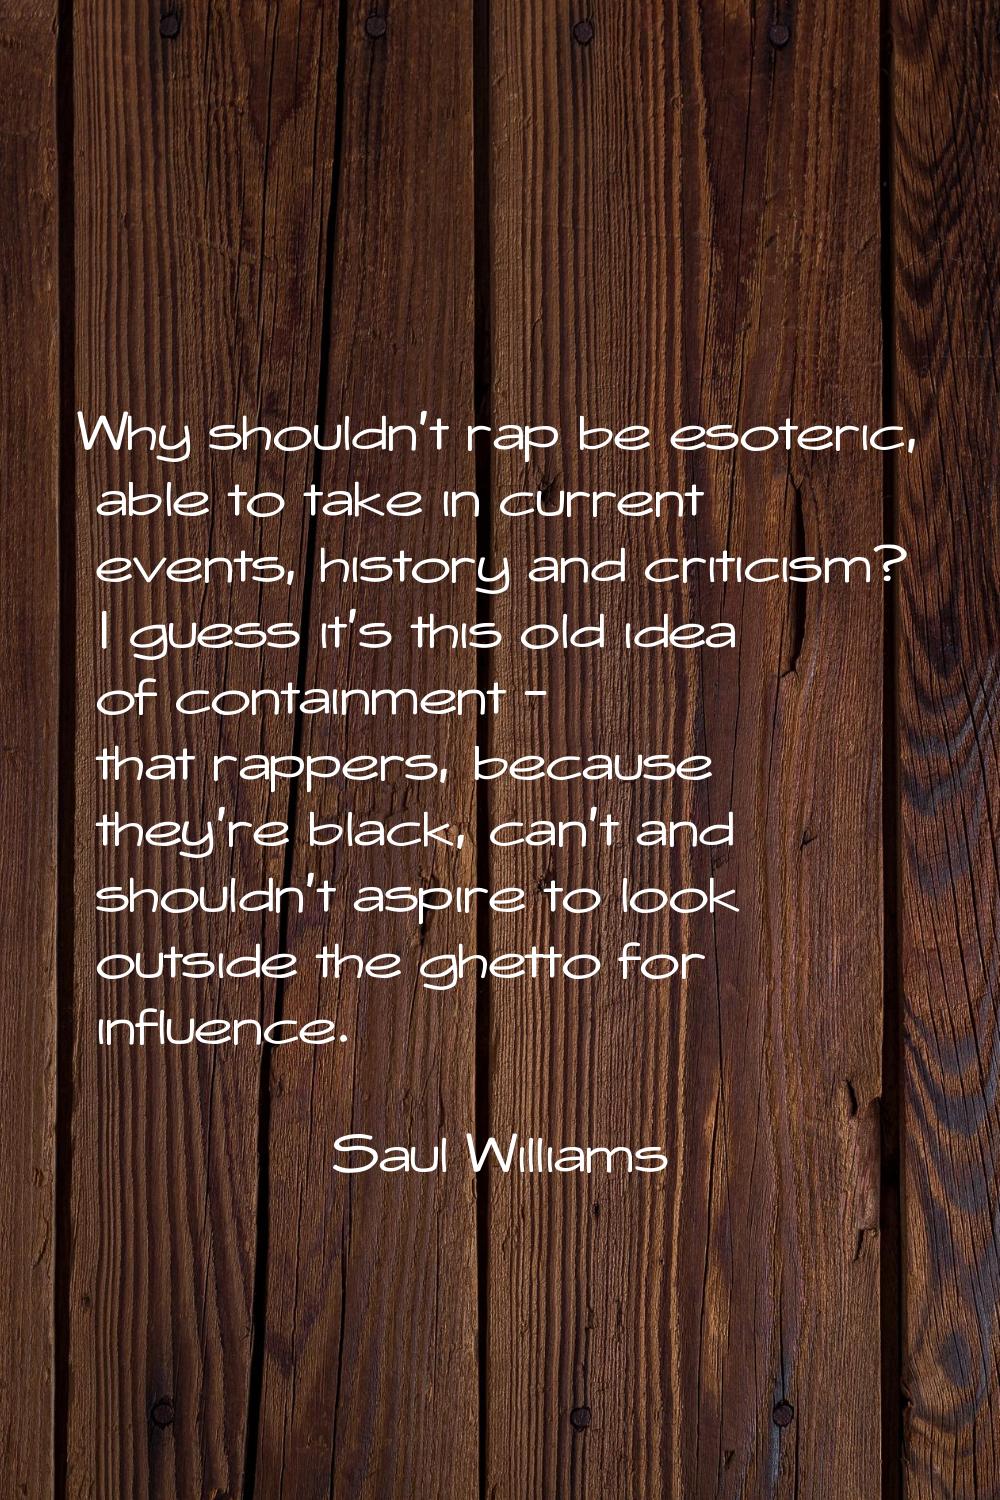 Why shouldn't rap be esoteric, able to take in current events, history and criticism? I guess it's 